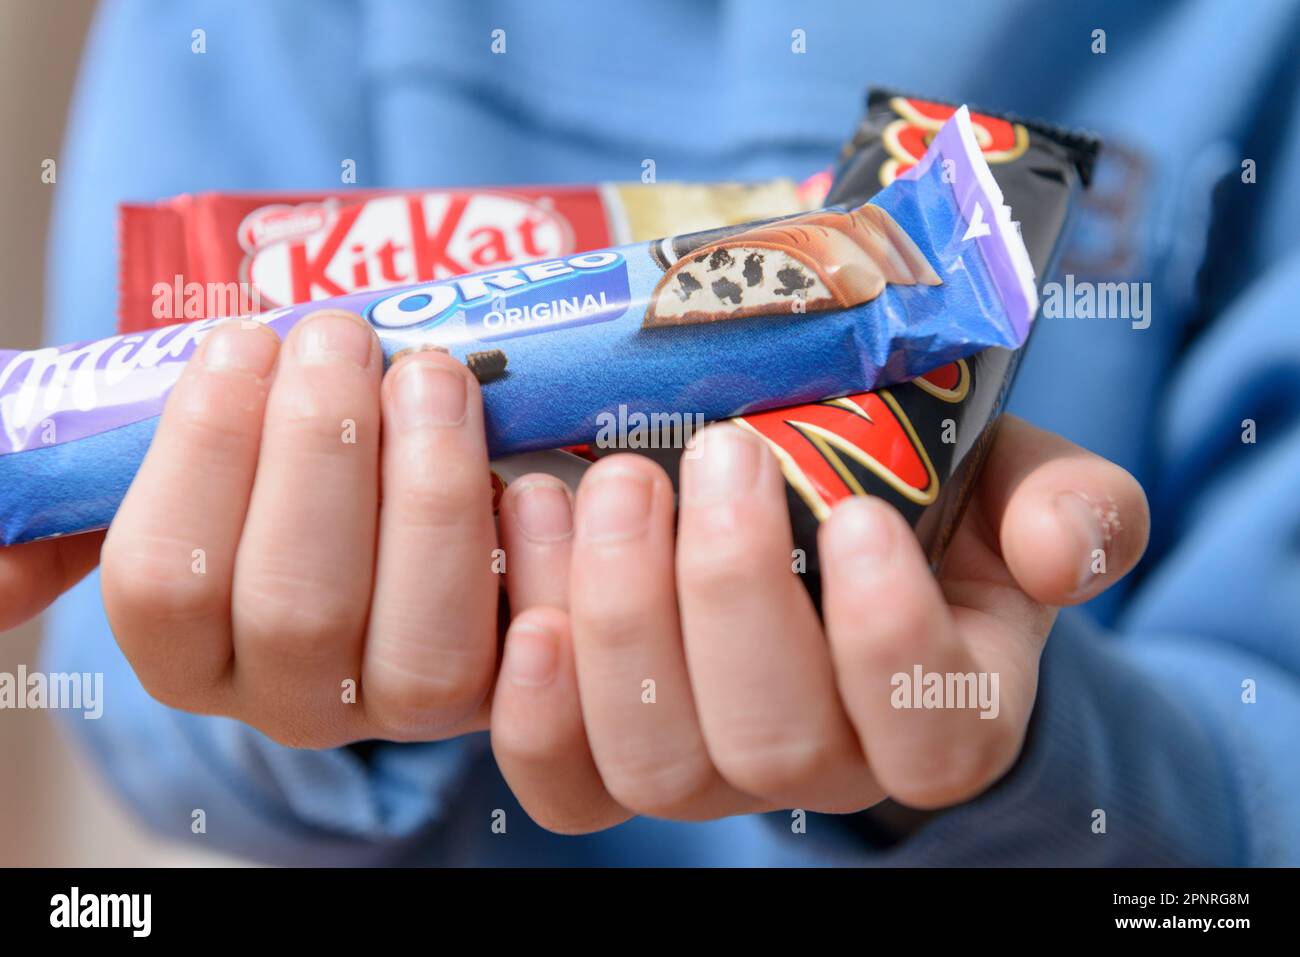 Arahal. Seville. Spain. March 18, 2023. Hands of a child holding chocolates from different brands. Excessive consumption of sugar can have negative co Stock Photo